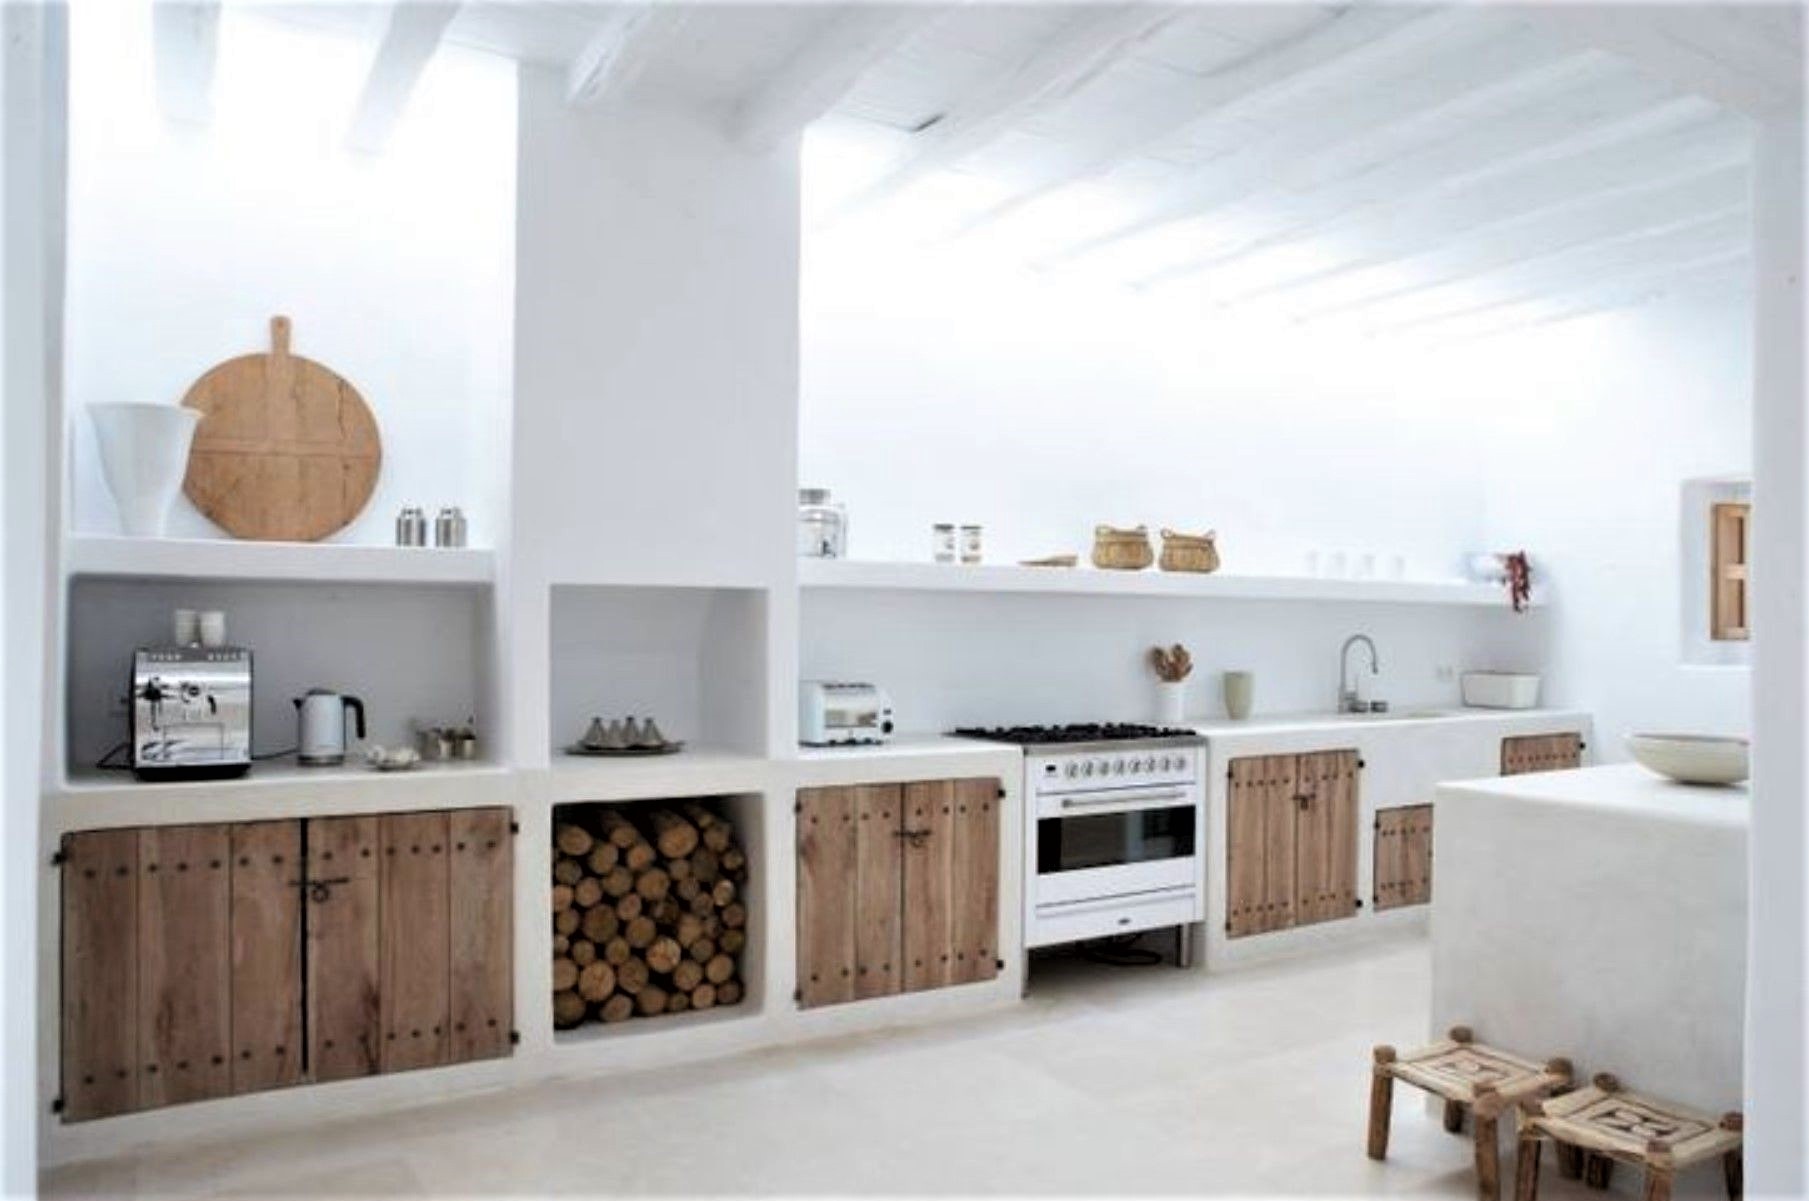 Example of a custom designed kitchen using plasterboard with reduced water absorption